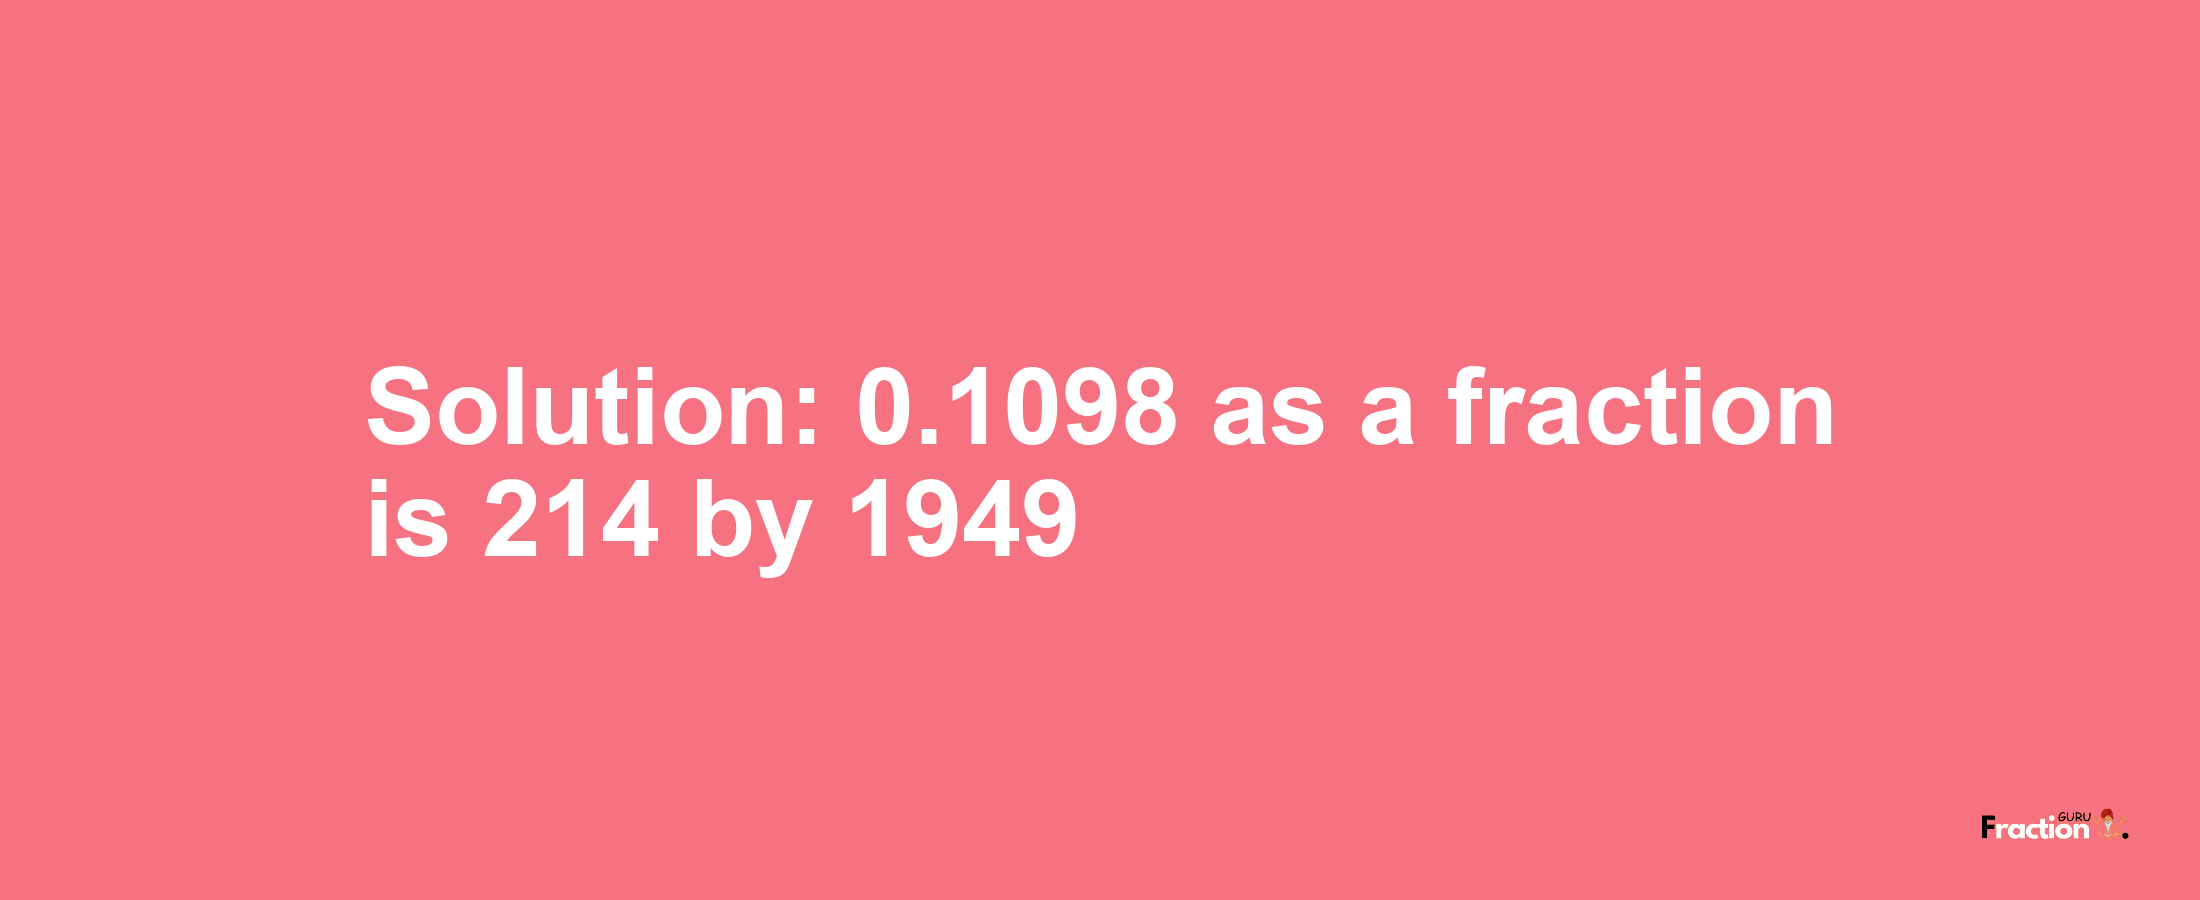 Solution:0.1098 as a fraction is 214/1949